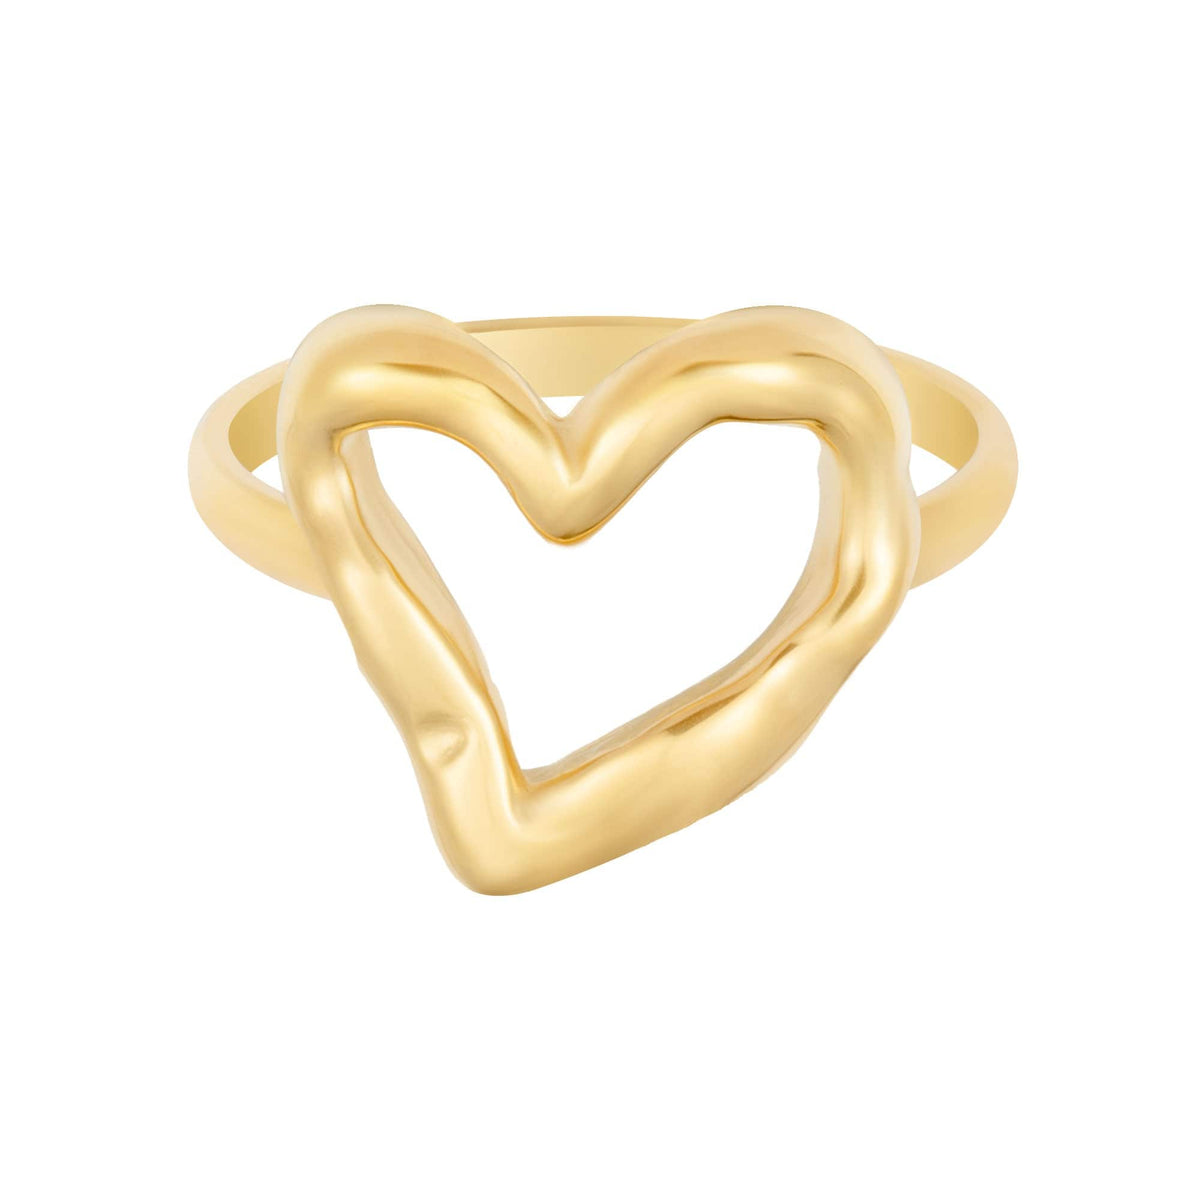 BohoMoon Stainless Steel True Love Ring Gold / US 6 / UK L / EUR 51 (small)